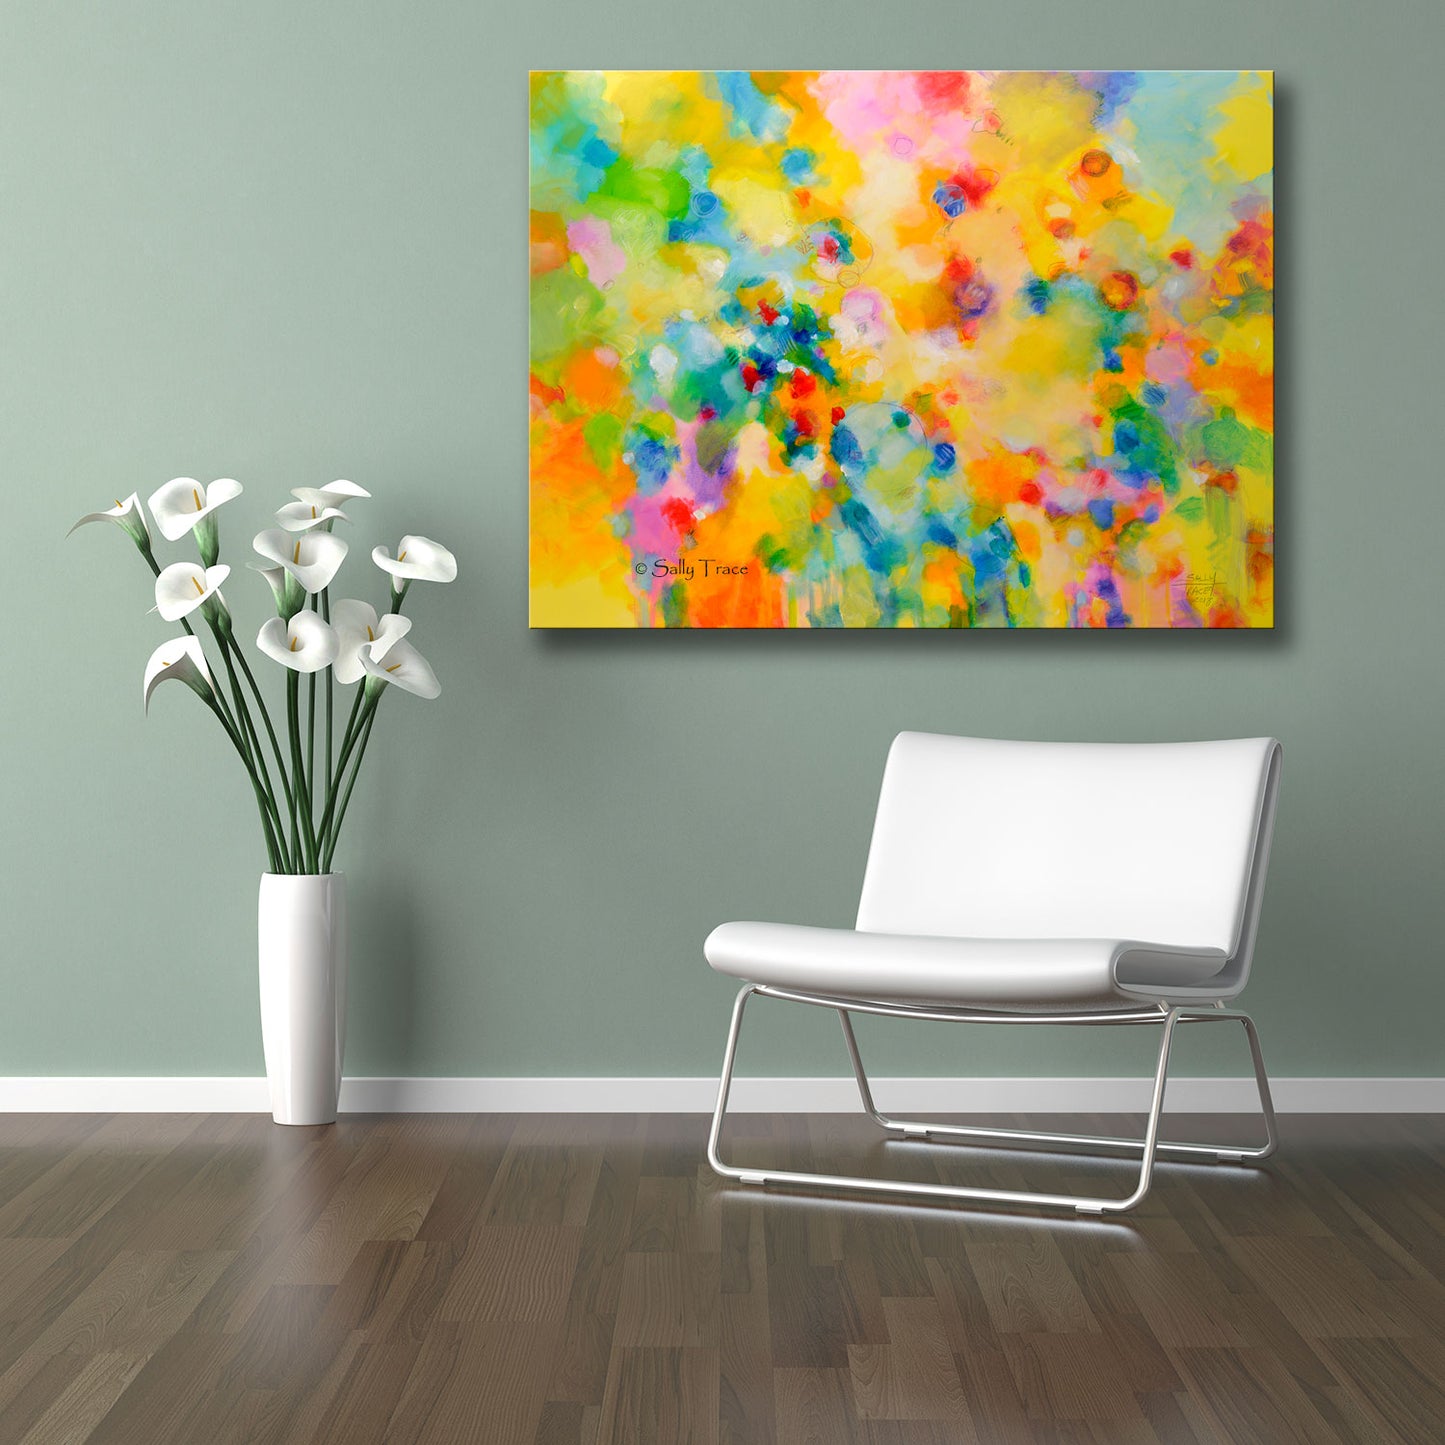 Modern contemporary art for sale by Sally Trace, "Lightness" giclee print on canvas by Sally Trace, room view